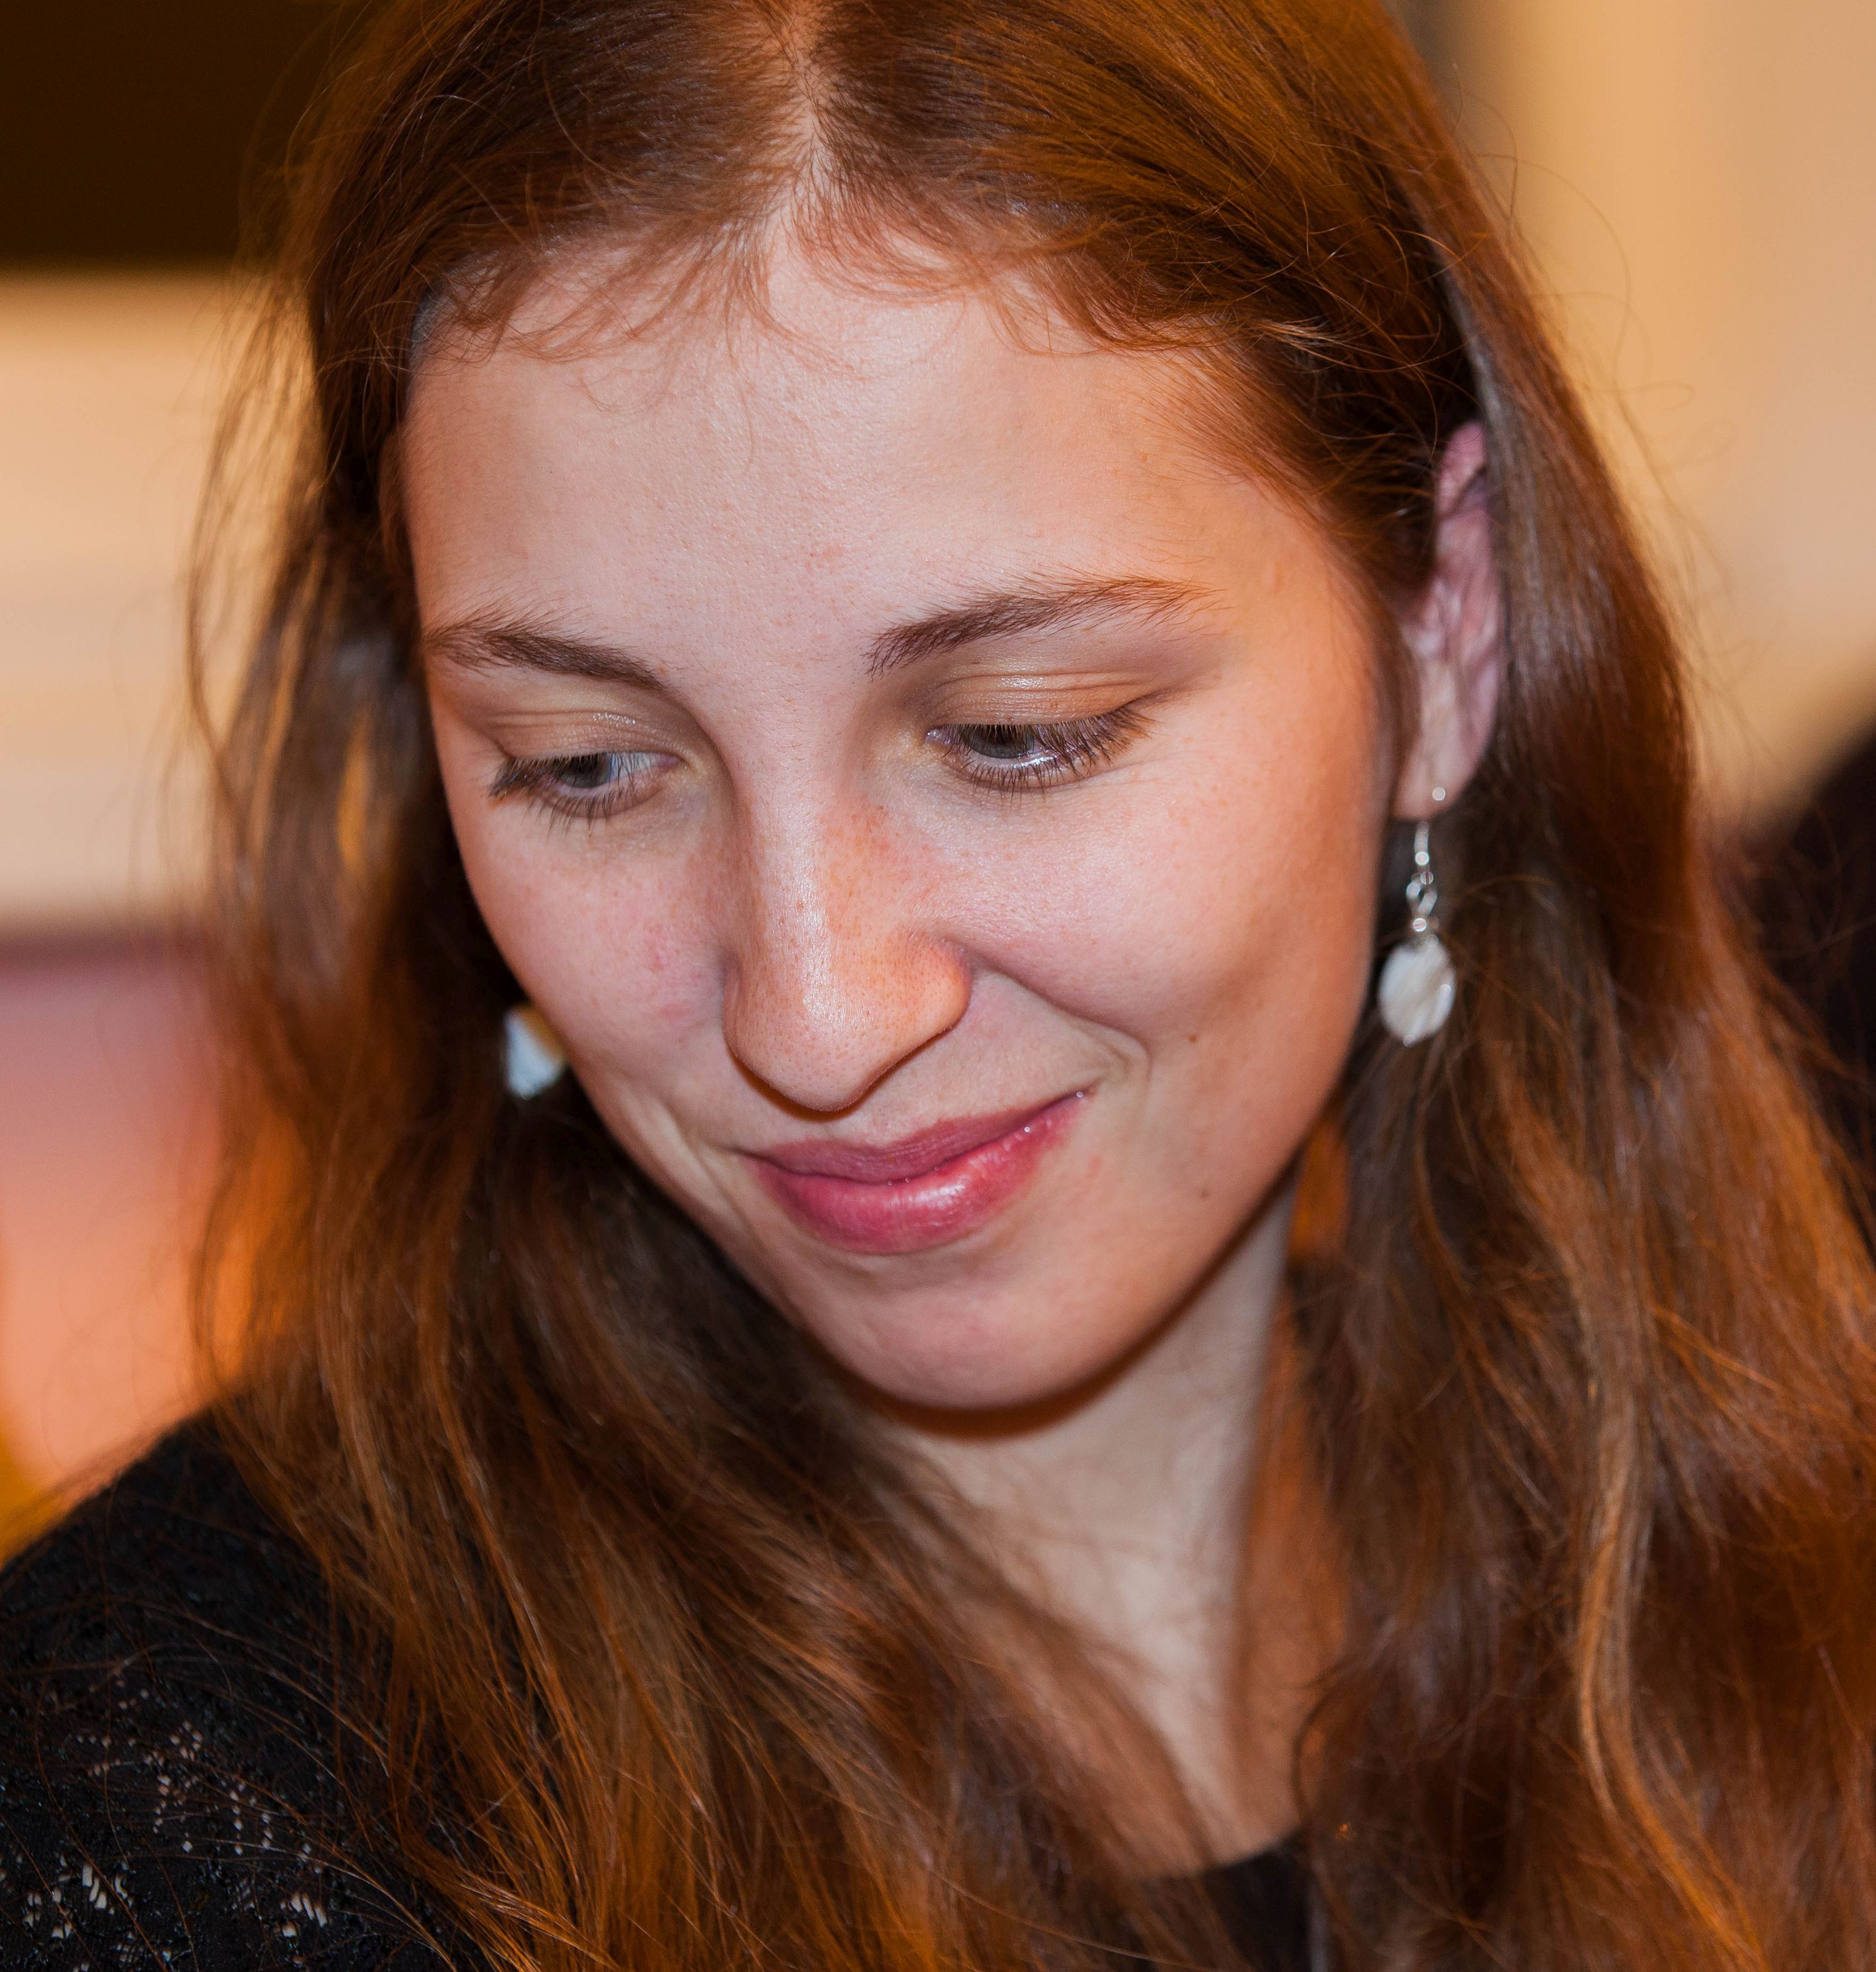 a young attractive Catholic woman photographed in December 2013, portrait 1/4